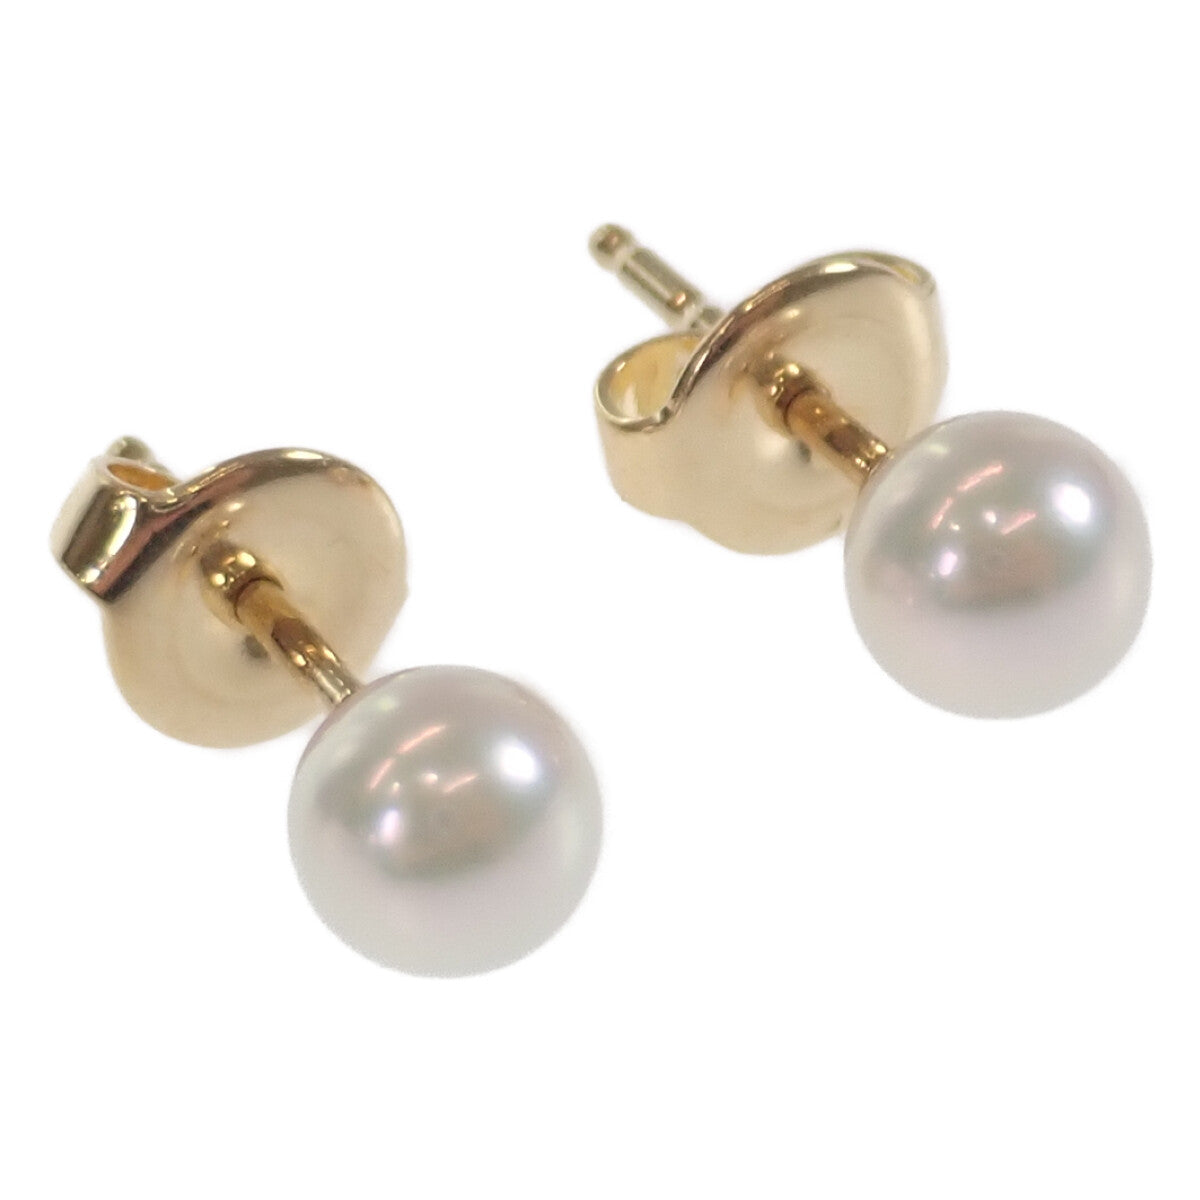 Mikimoto 18k Gold Pearl Stud Earrings Metal Earrings in Excellent condition